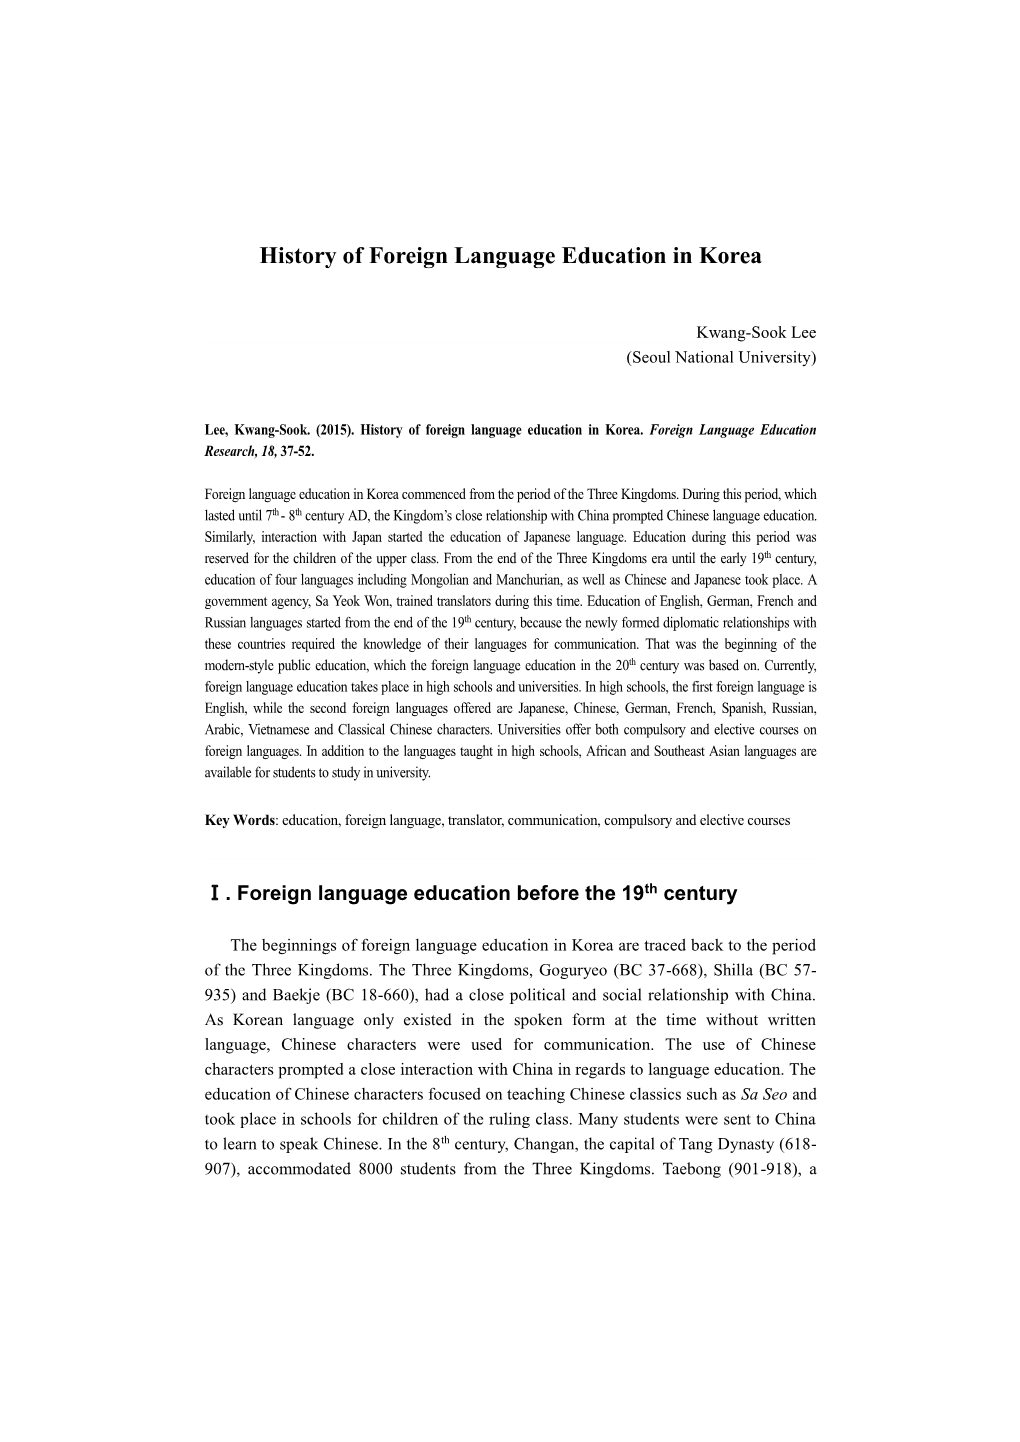 History of Foreign Language Education in Korea